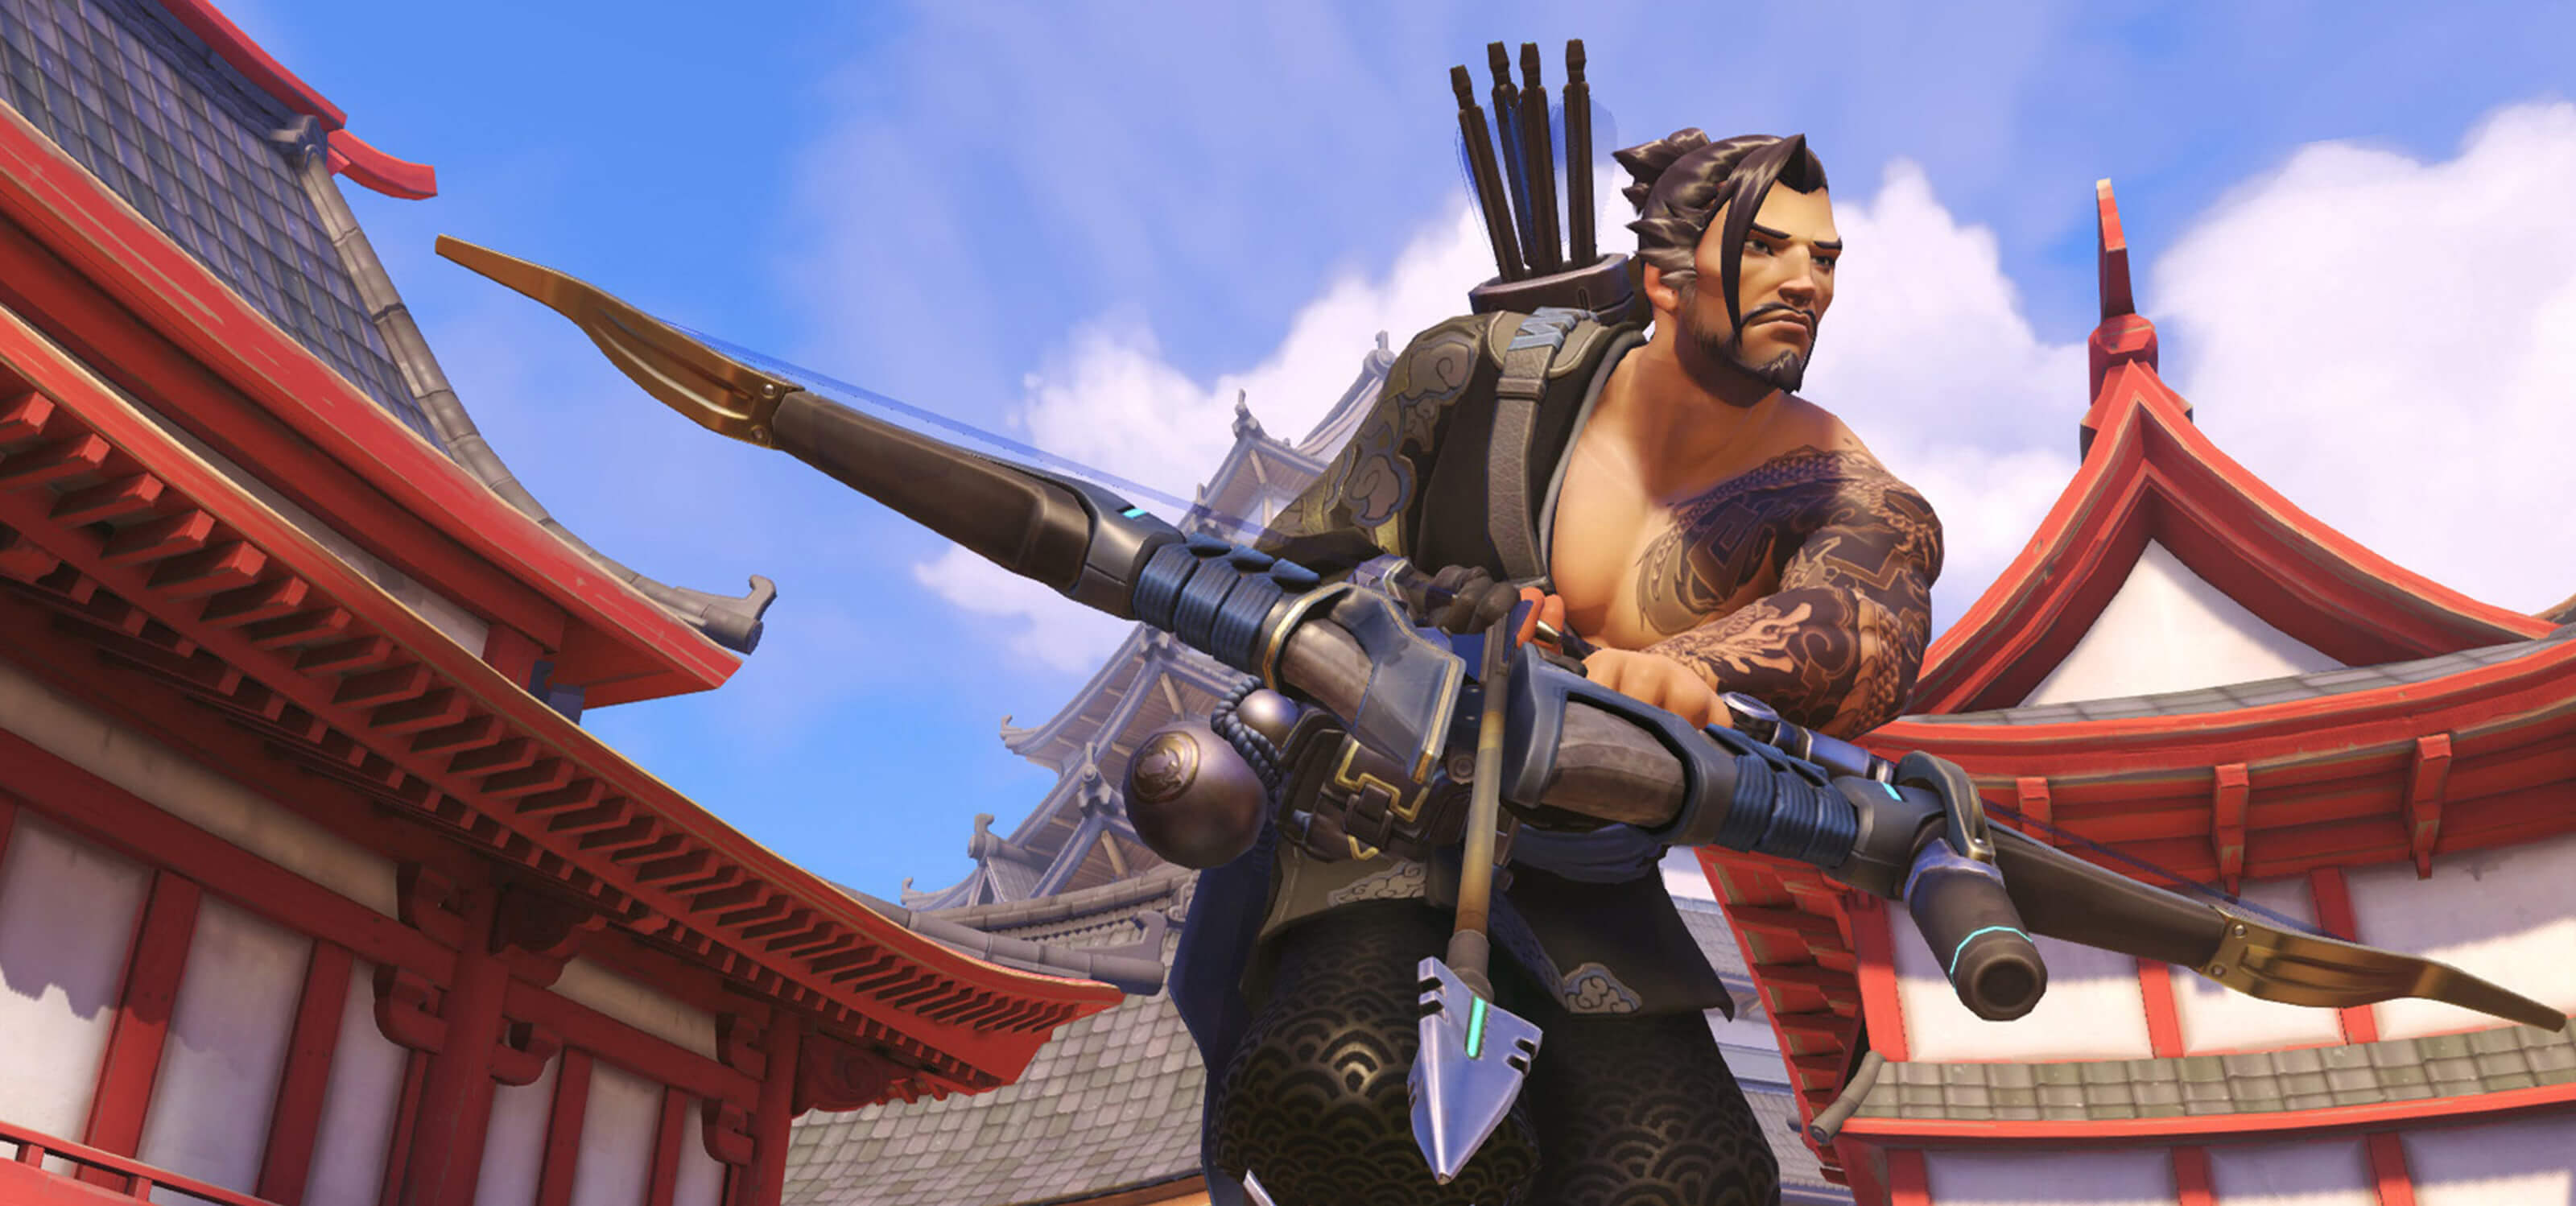 Overwatch character Hanzo wielding his storm bow among several pagodas